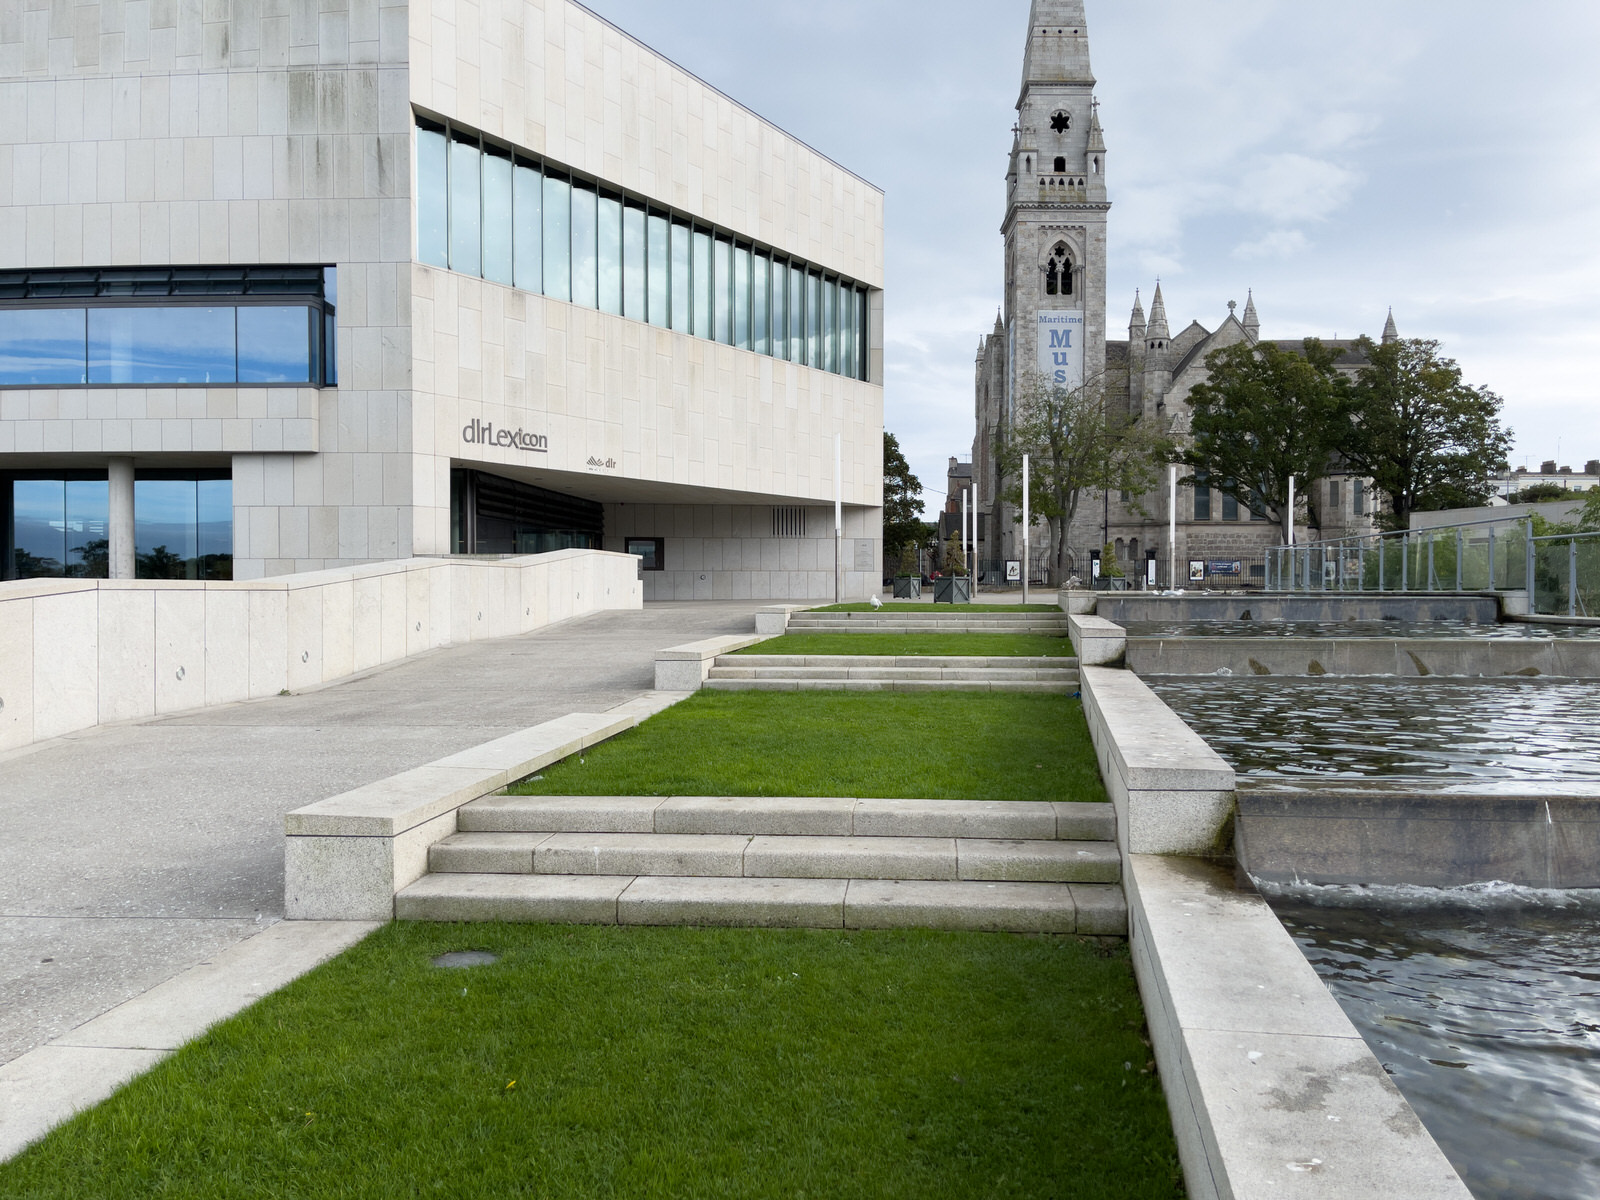 THE WATER FEATURE AT THE DLR LEXICON [MORAN PARK DUN LAOGHAIRE 10 OCTOBER 2023] 008